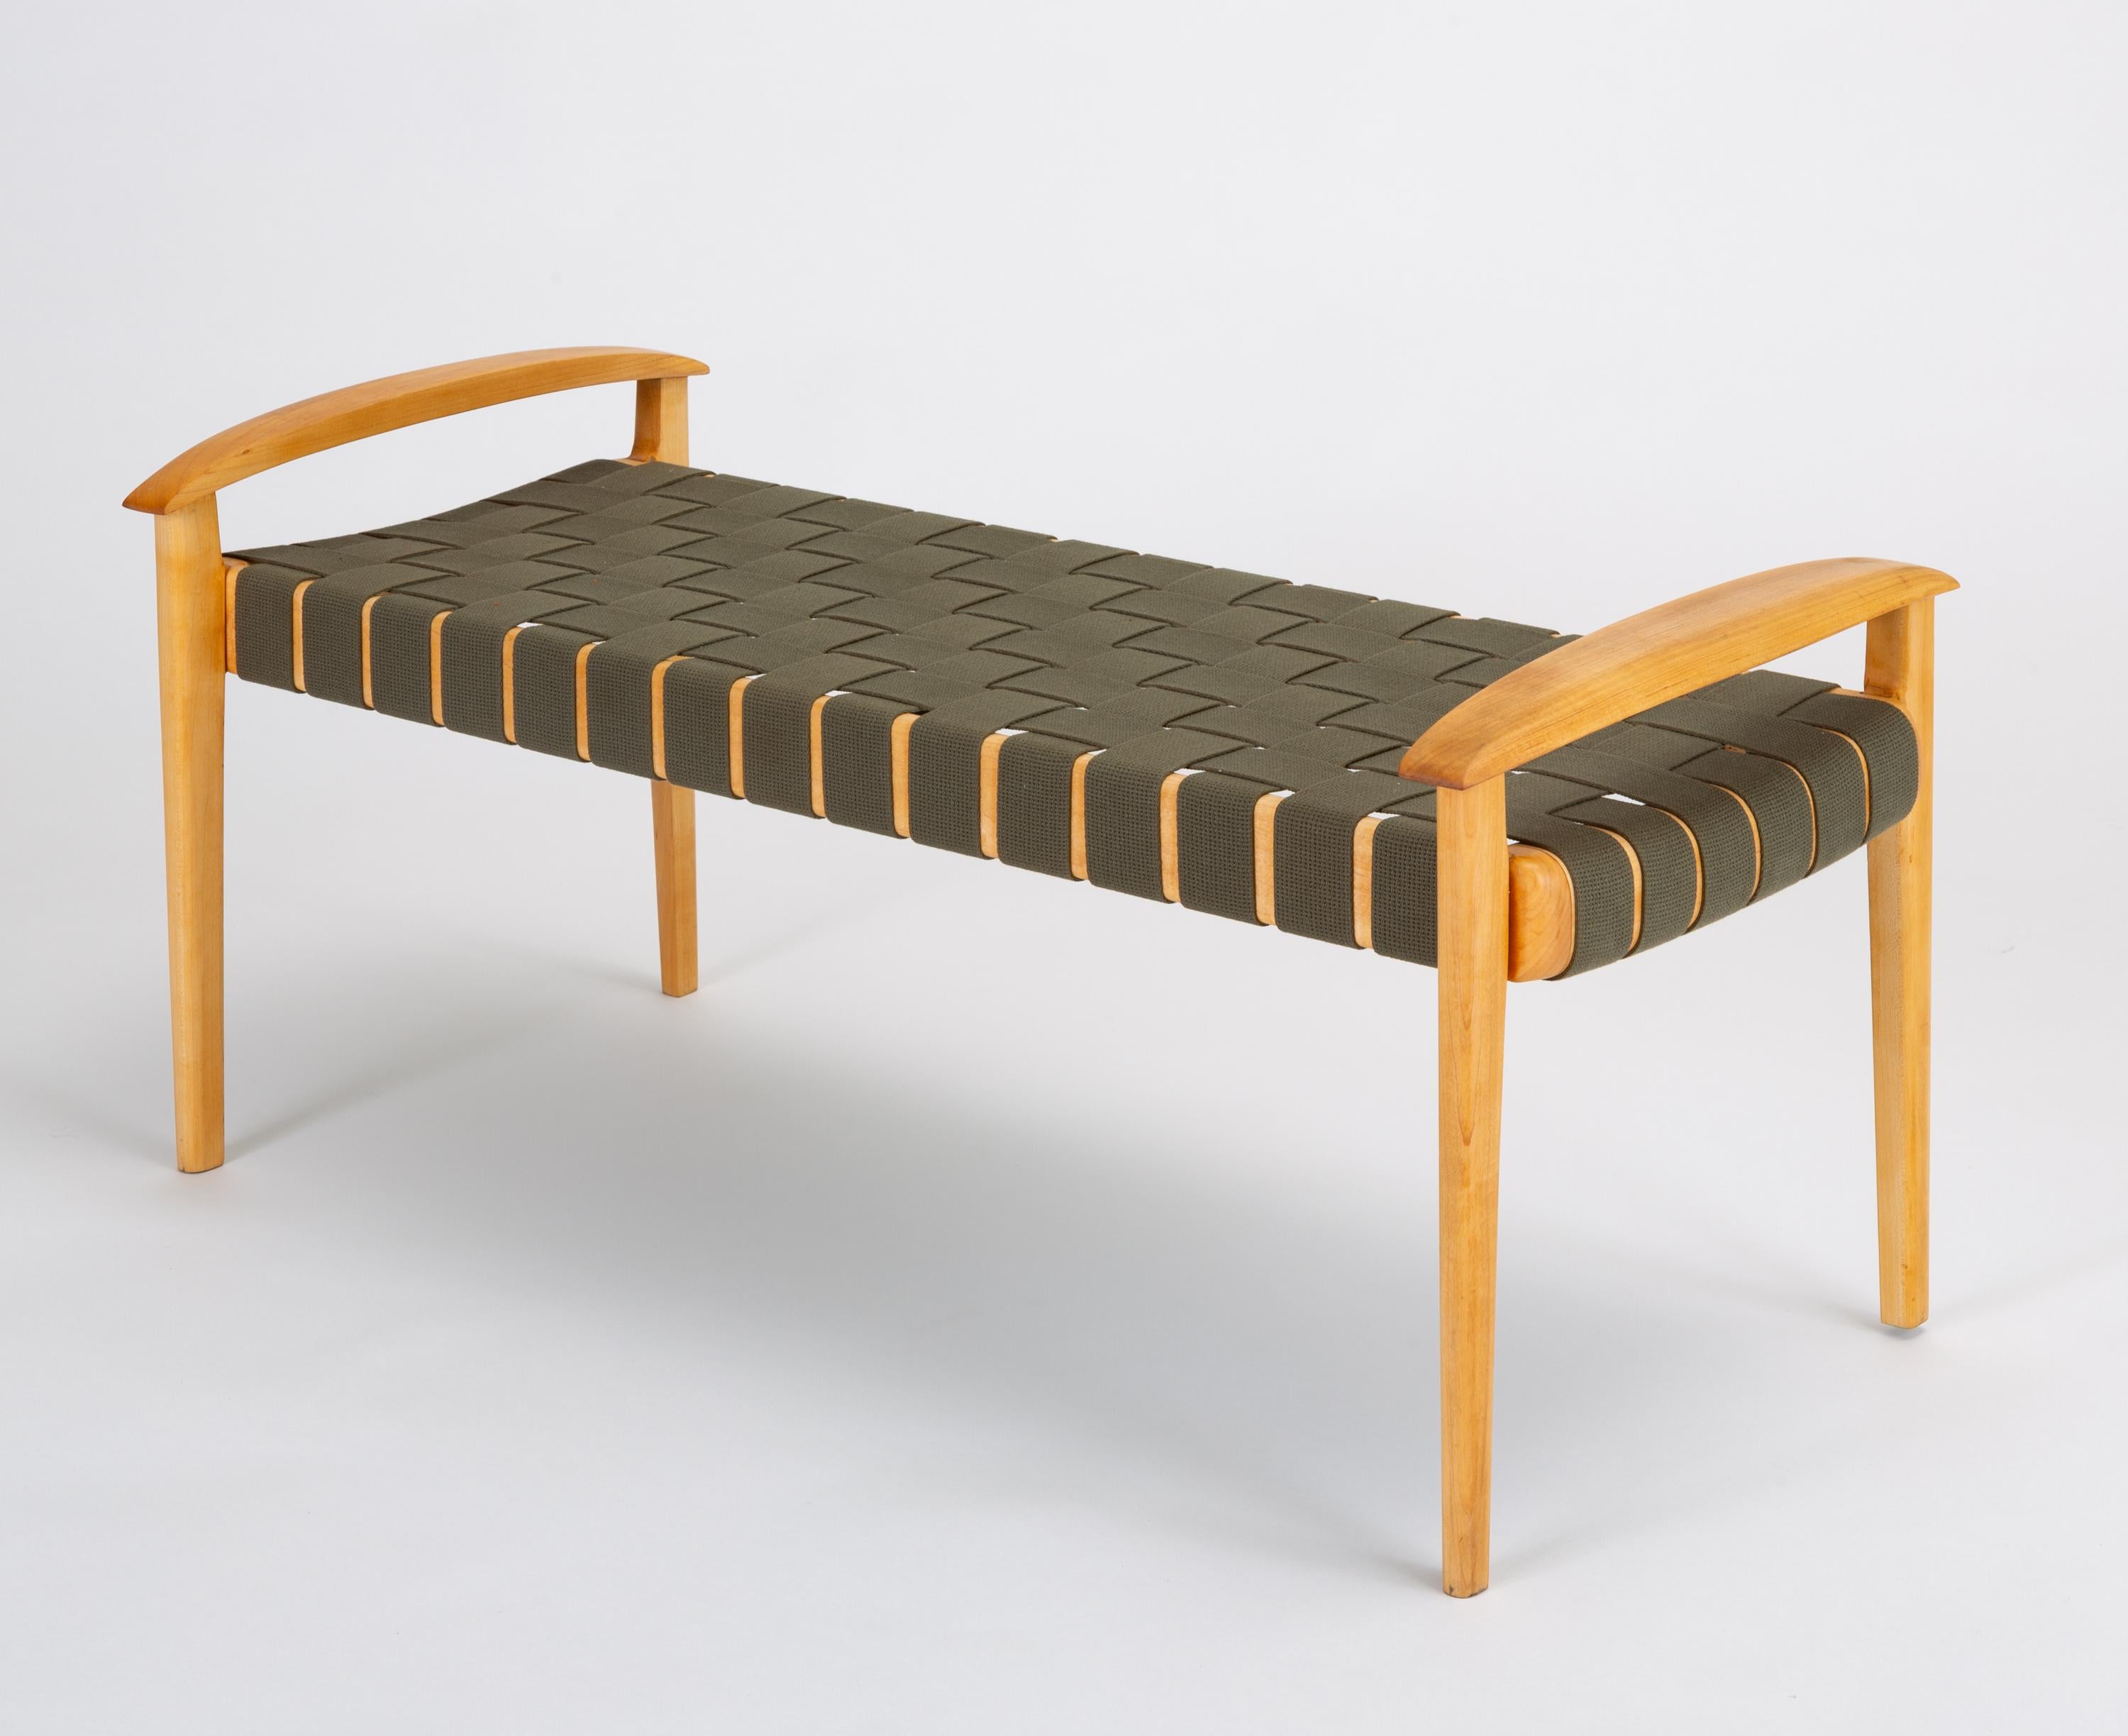 Cotton American-Made Maple Bench with Woven Seat by Tom Ghilarducci